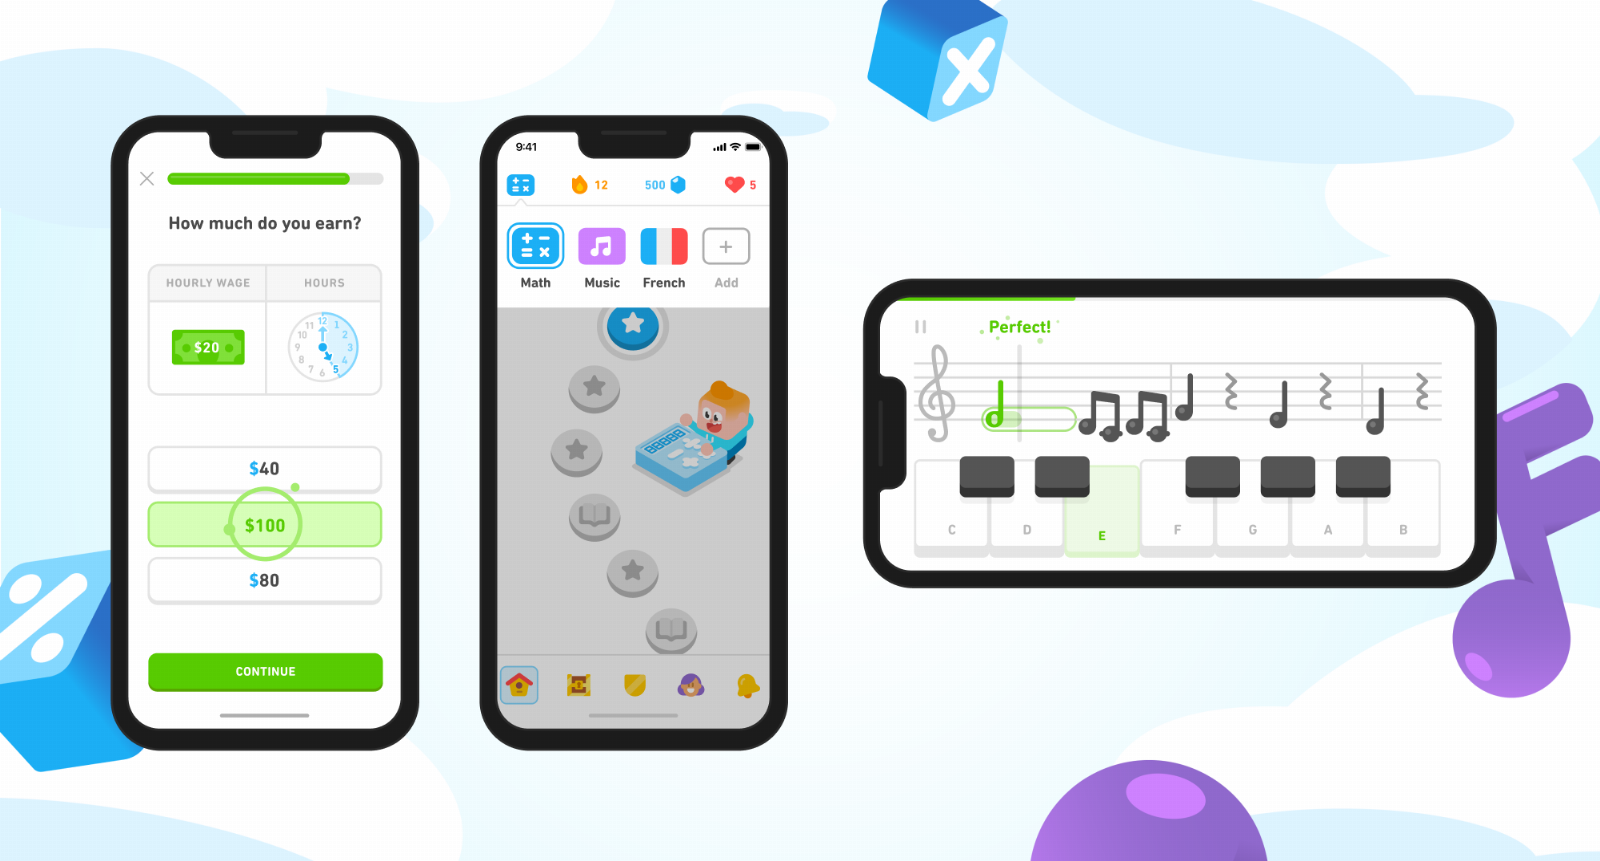 Duolingo confirms its app will soon include both math and music lessons